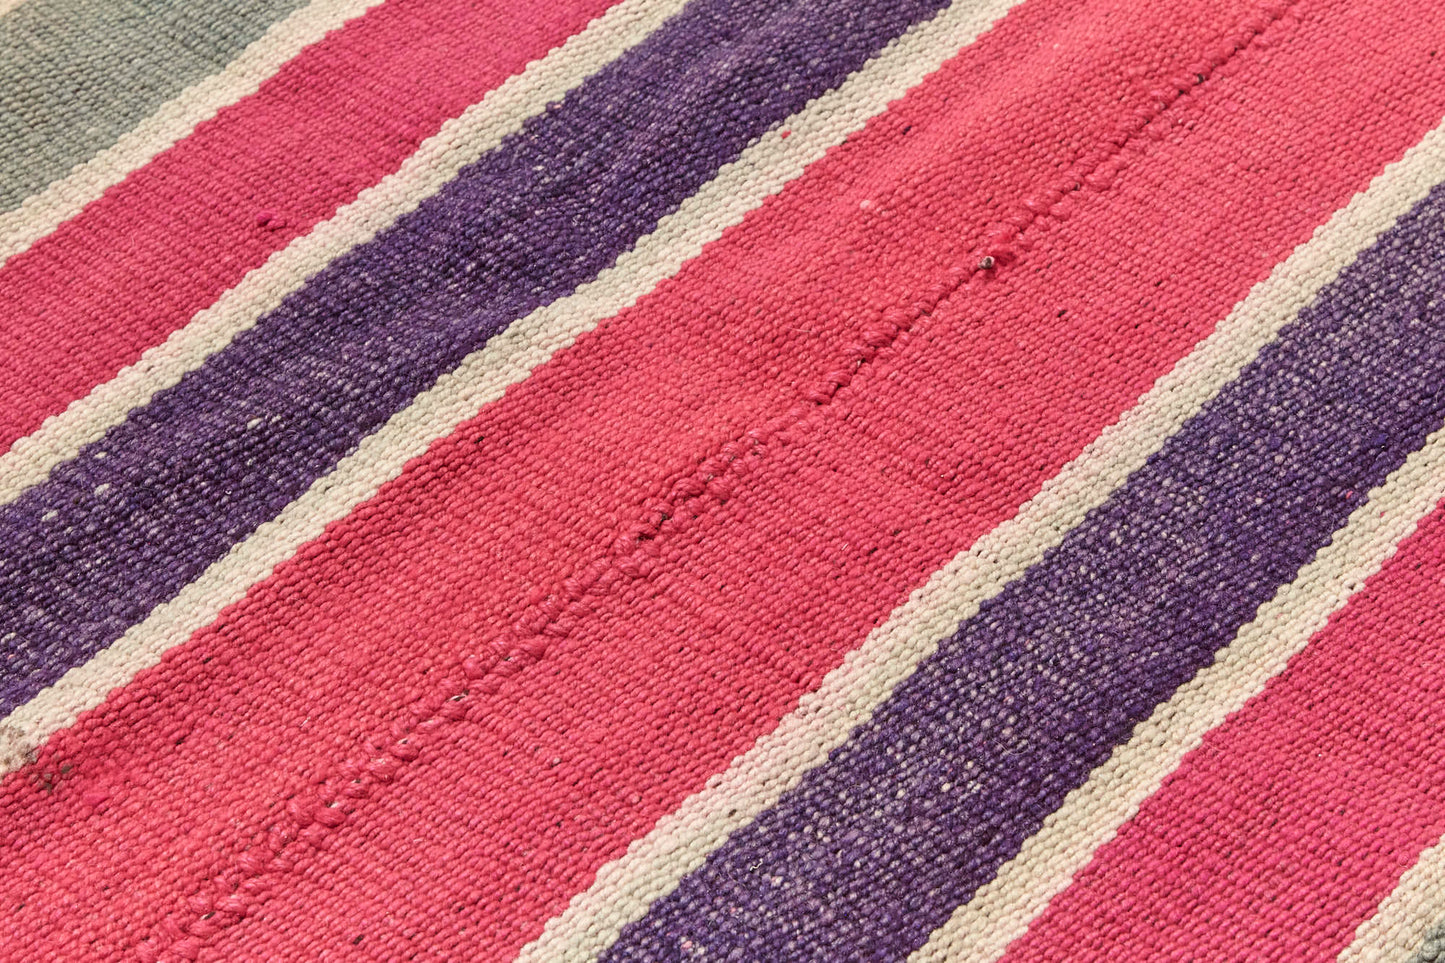 Guatemalan vintage rug with vibrant red, pink, purple and cream stripes, would be perfect for a bedroom, nursery or living room rug - Available from King Kennedy Rugs Los Angeles 